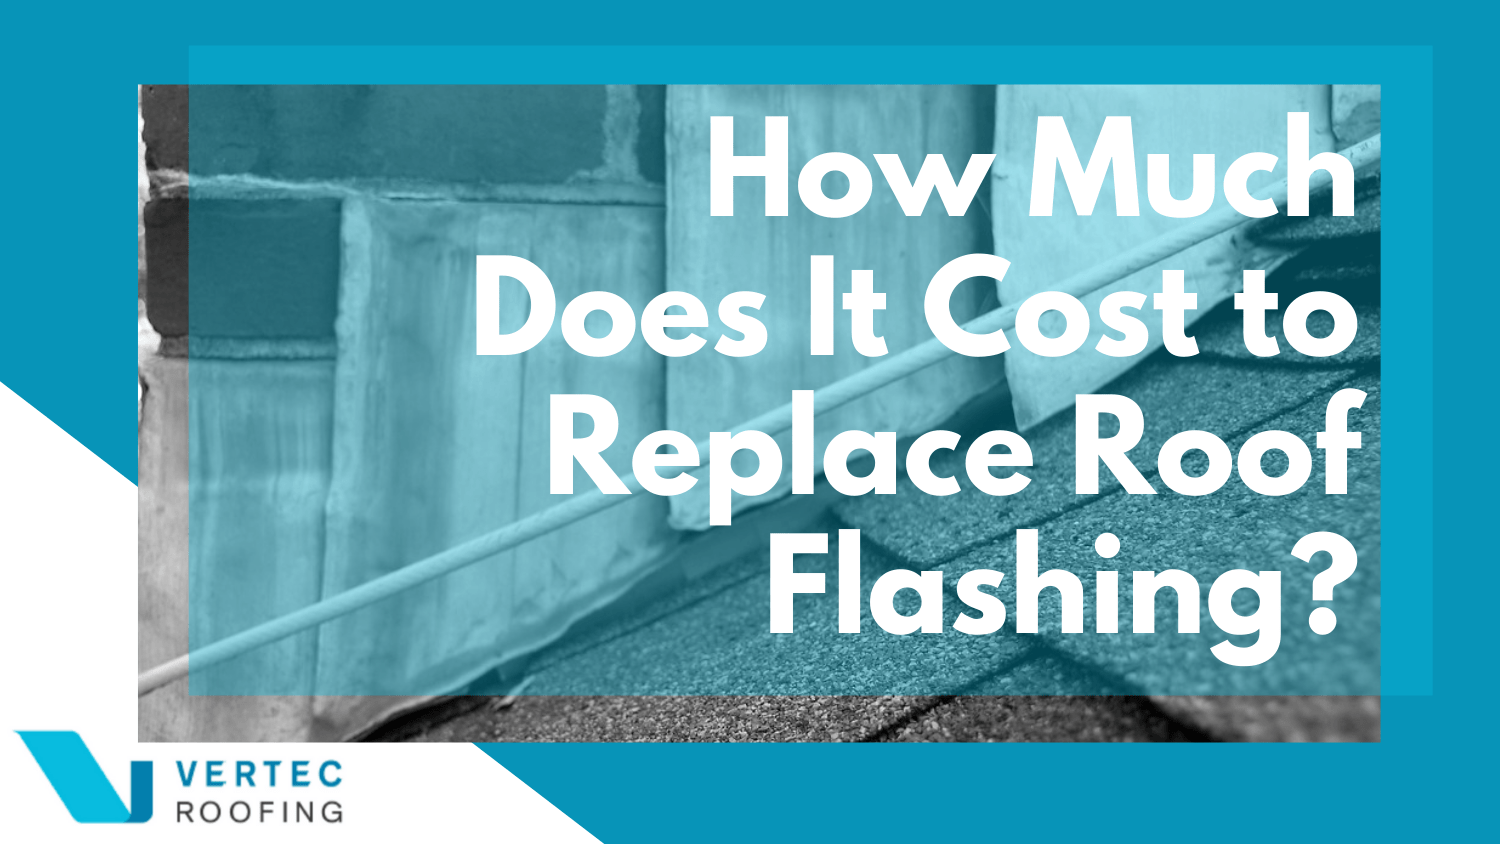 How Much Does It Cost to Replace Roof Flashing?